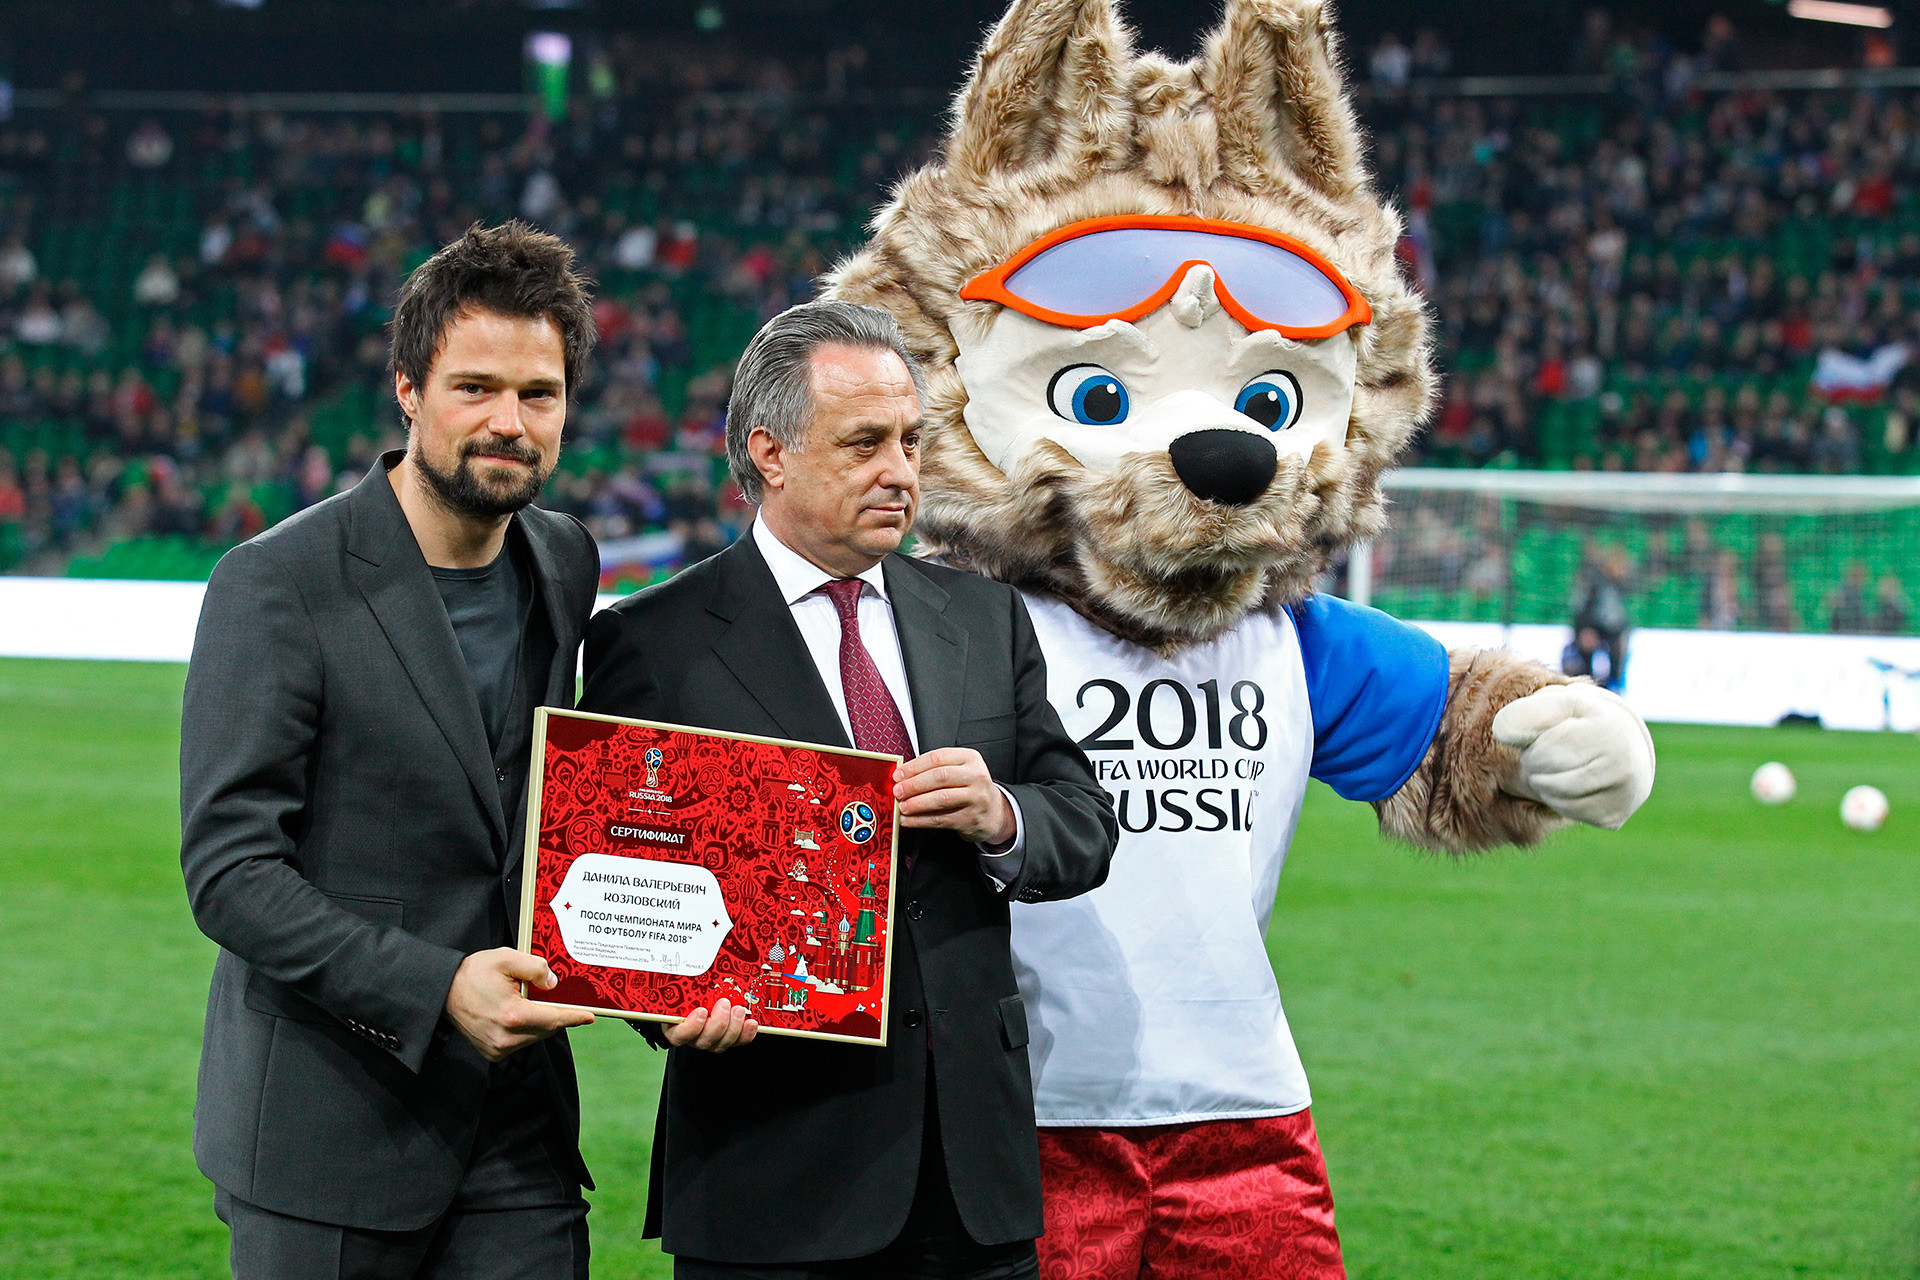 Danila Kozlovsky, President of the Russian Football Union Deputy Prime Minister V. Mutko and the 2018 FIFA World Cup official mascot Zabivaka during the ceremony of certifying Danila Kozlovsky as a 2018 FIFA World Cup Ambassador prior to the football friendly match between Russia and Côte d’Ivoire.